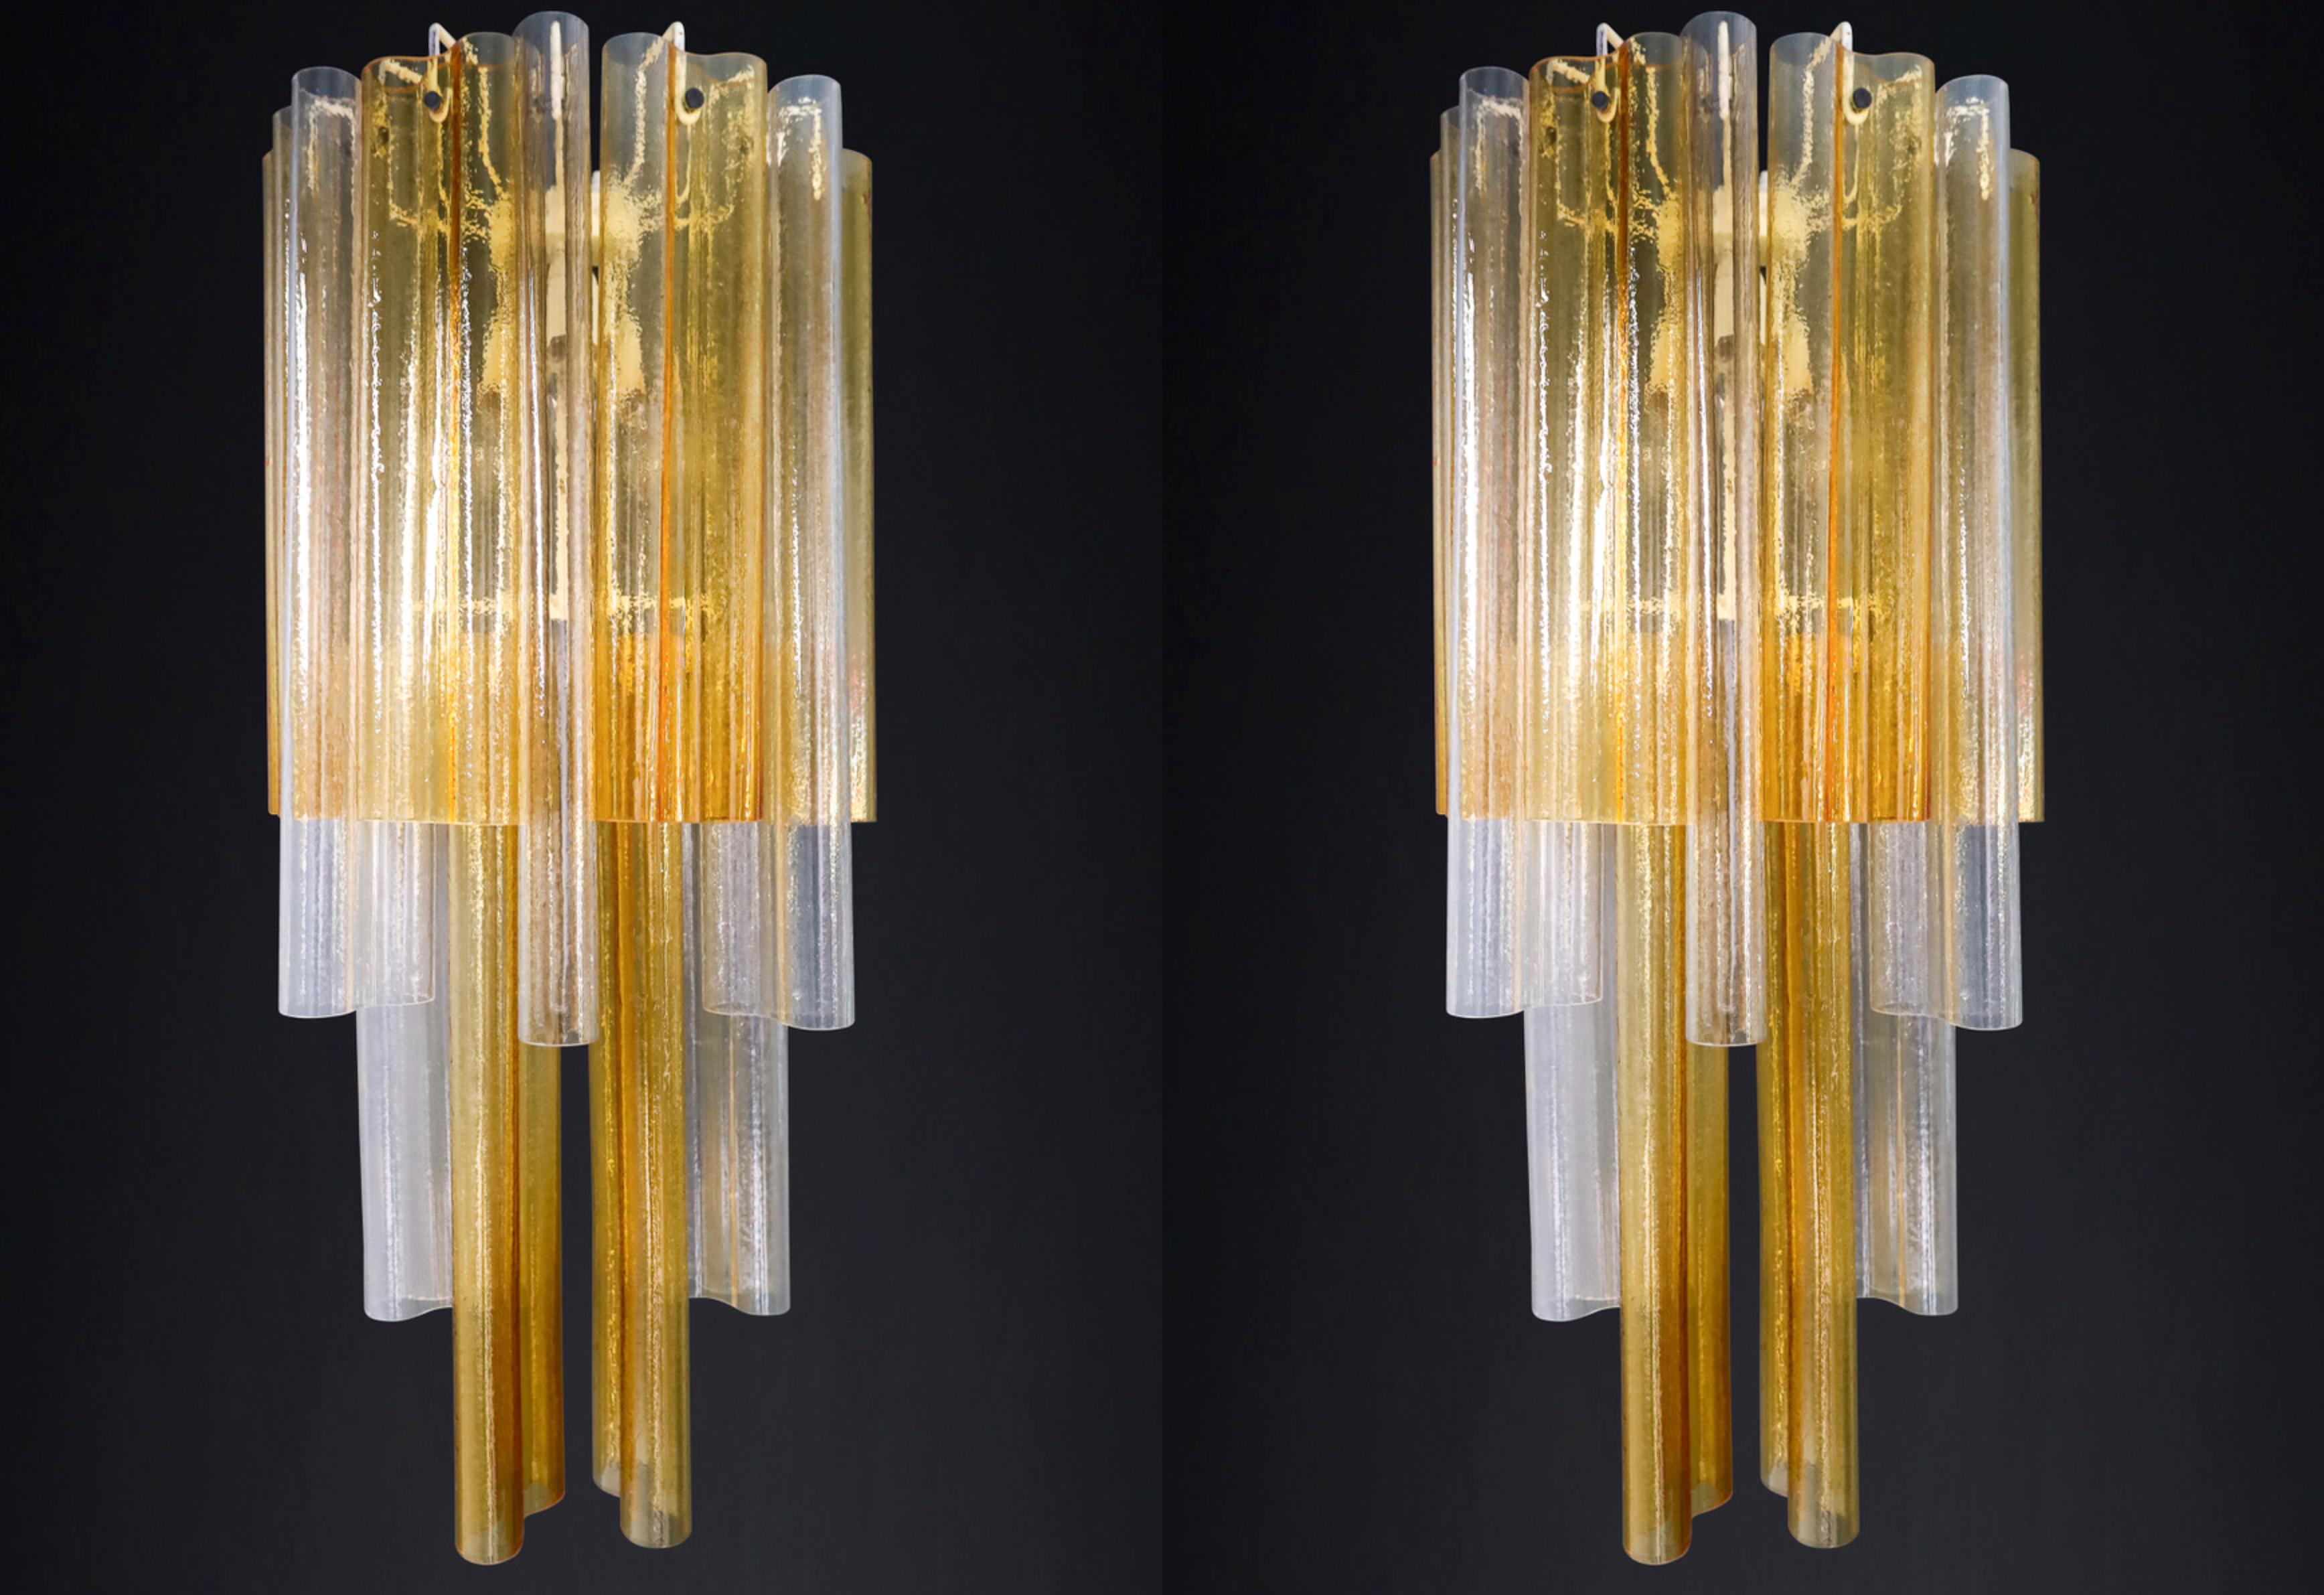 Pair XXL Venini Wall Chandeliers with Murano Amber and Ice Glass, Italy 1960 

We're selling a pair of gorgeous Venini Wall chandeliers from the 1960s, each featuring hand-blown Murano glass in amber and ice tones. These Italian-made lamps are